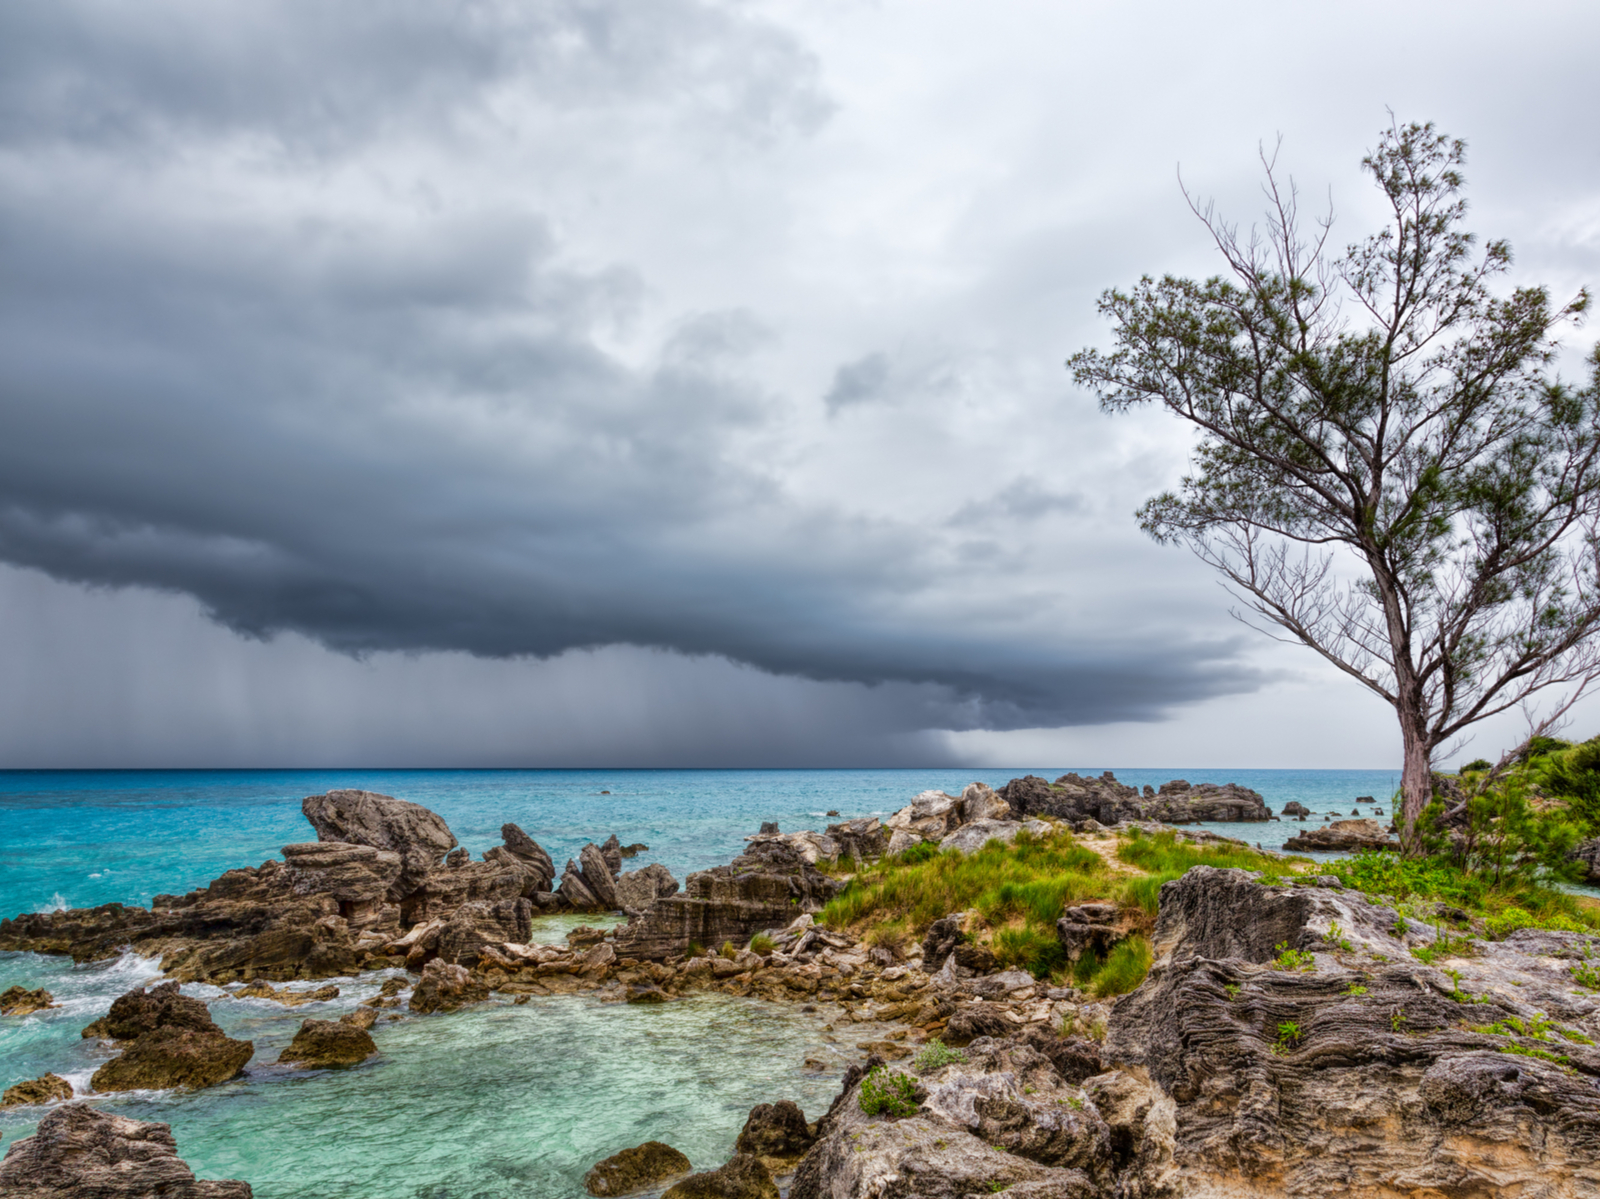 Severe rain storm over Tobacco Bay Beach during the worst time to visit Bermuda